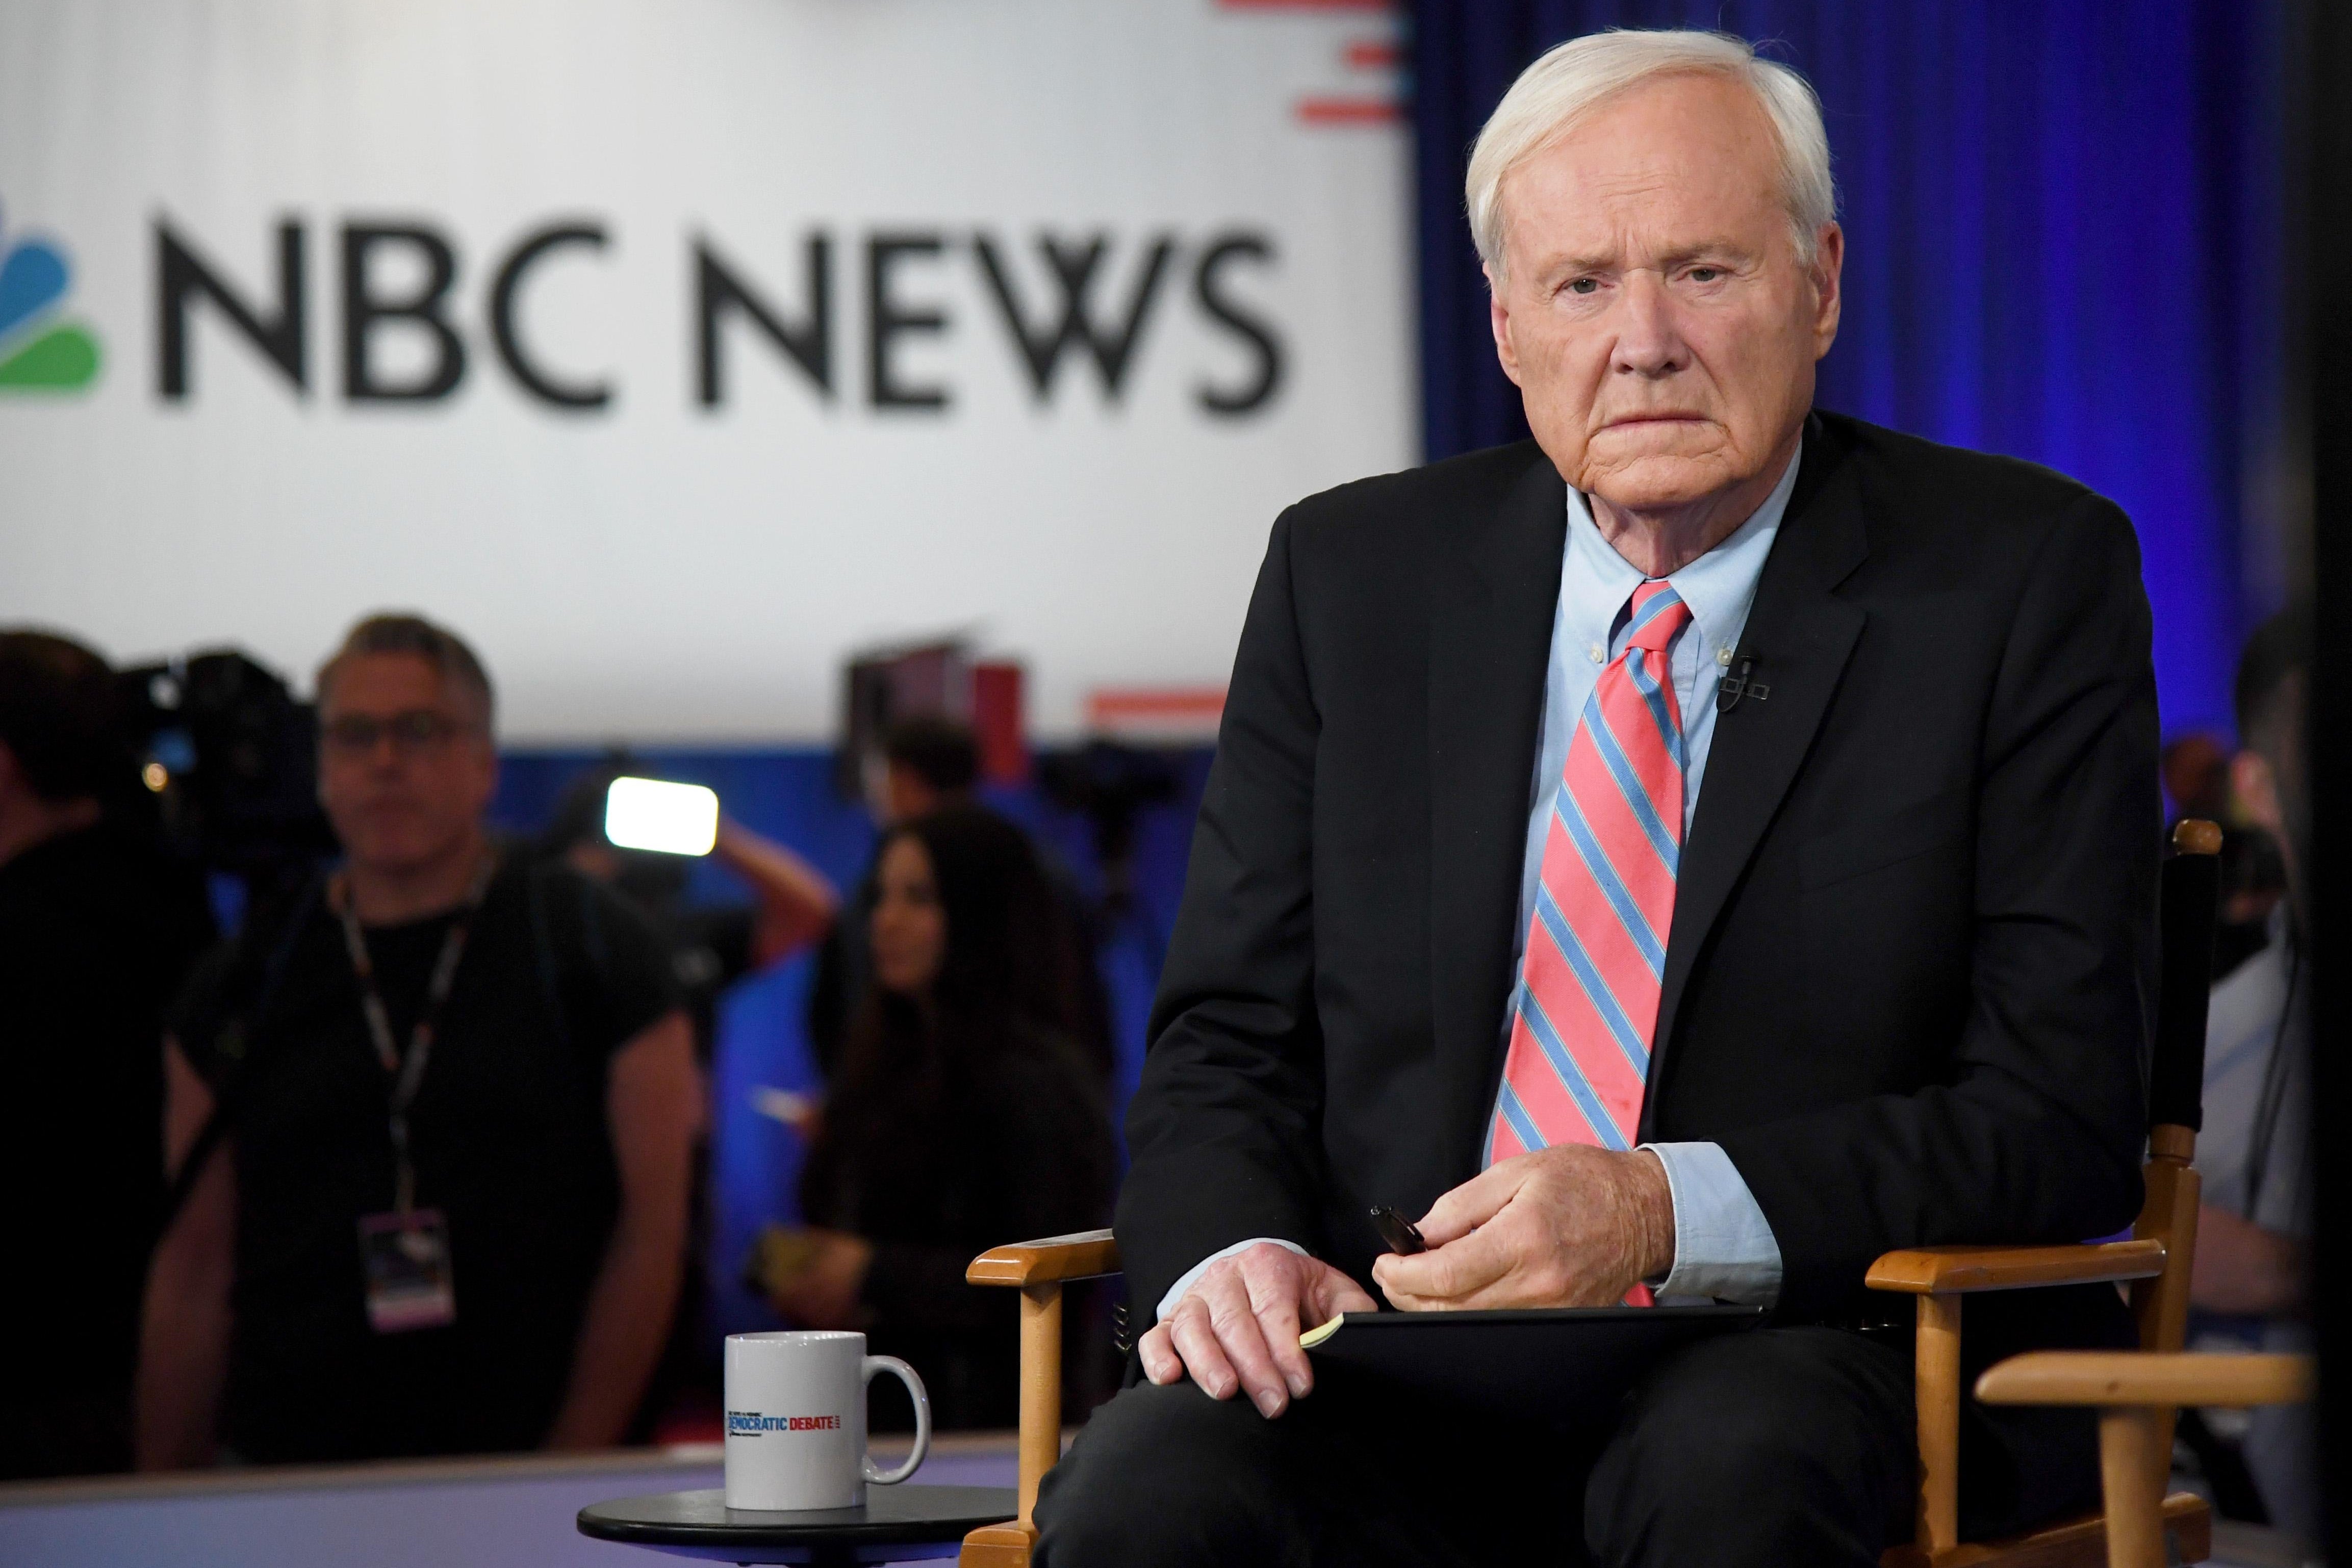 Chris Matthews seated in front of a screen displaying the NBC News logo.